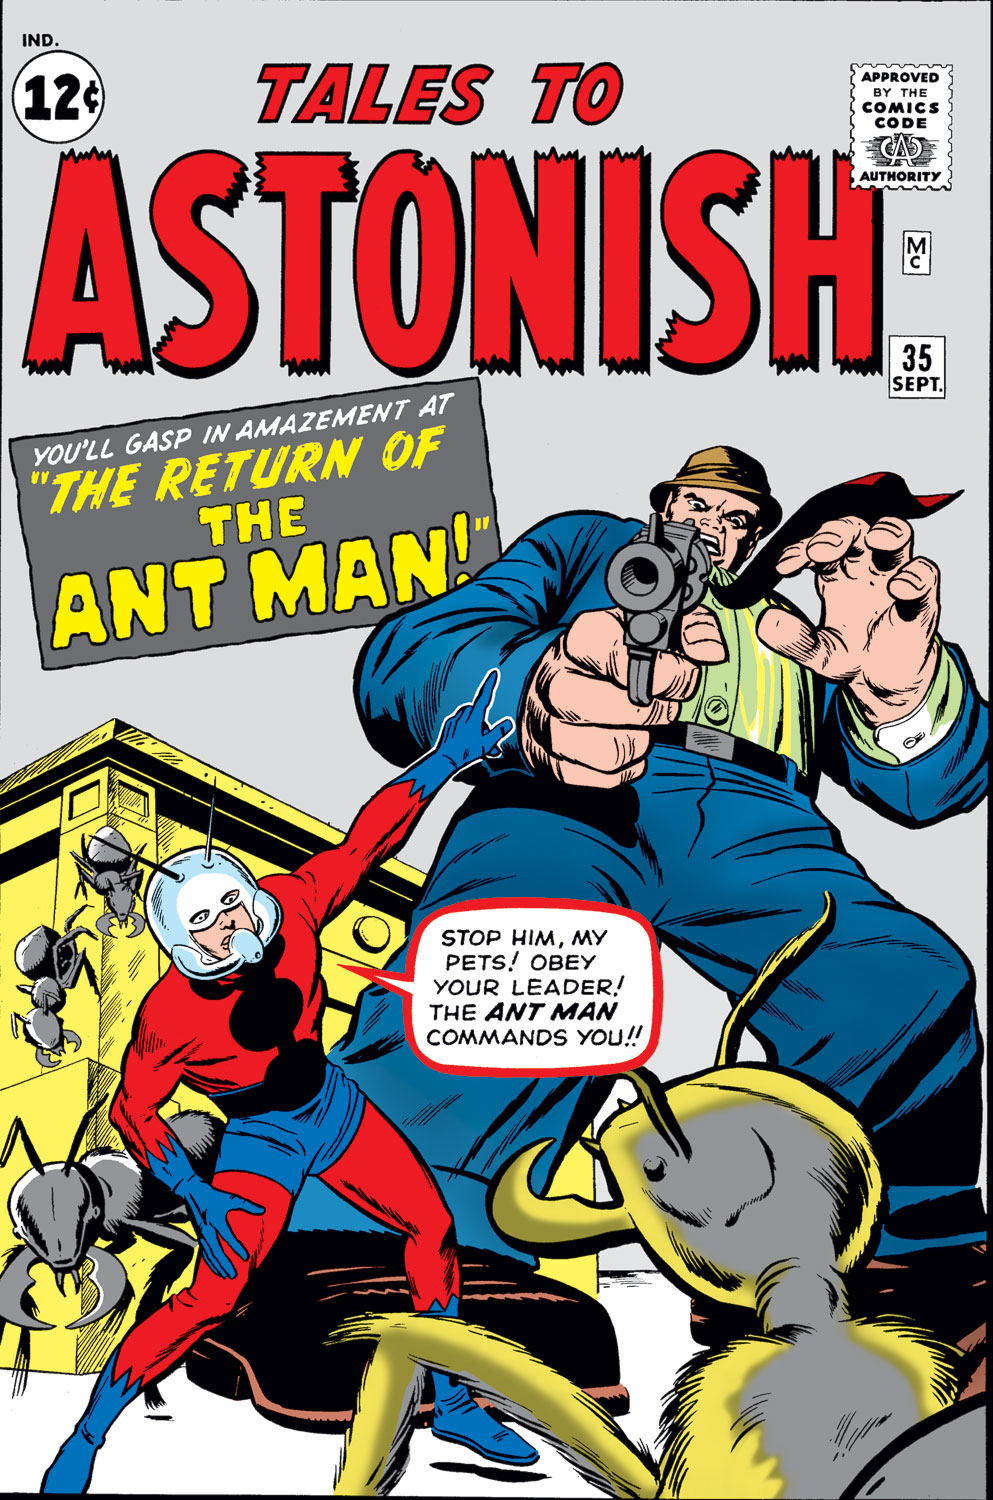 Tales to Astonish (1959) #35 | Comic Issues | Marvel